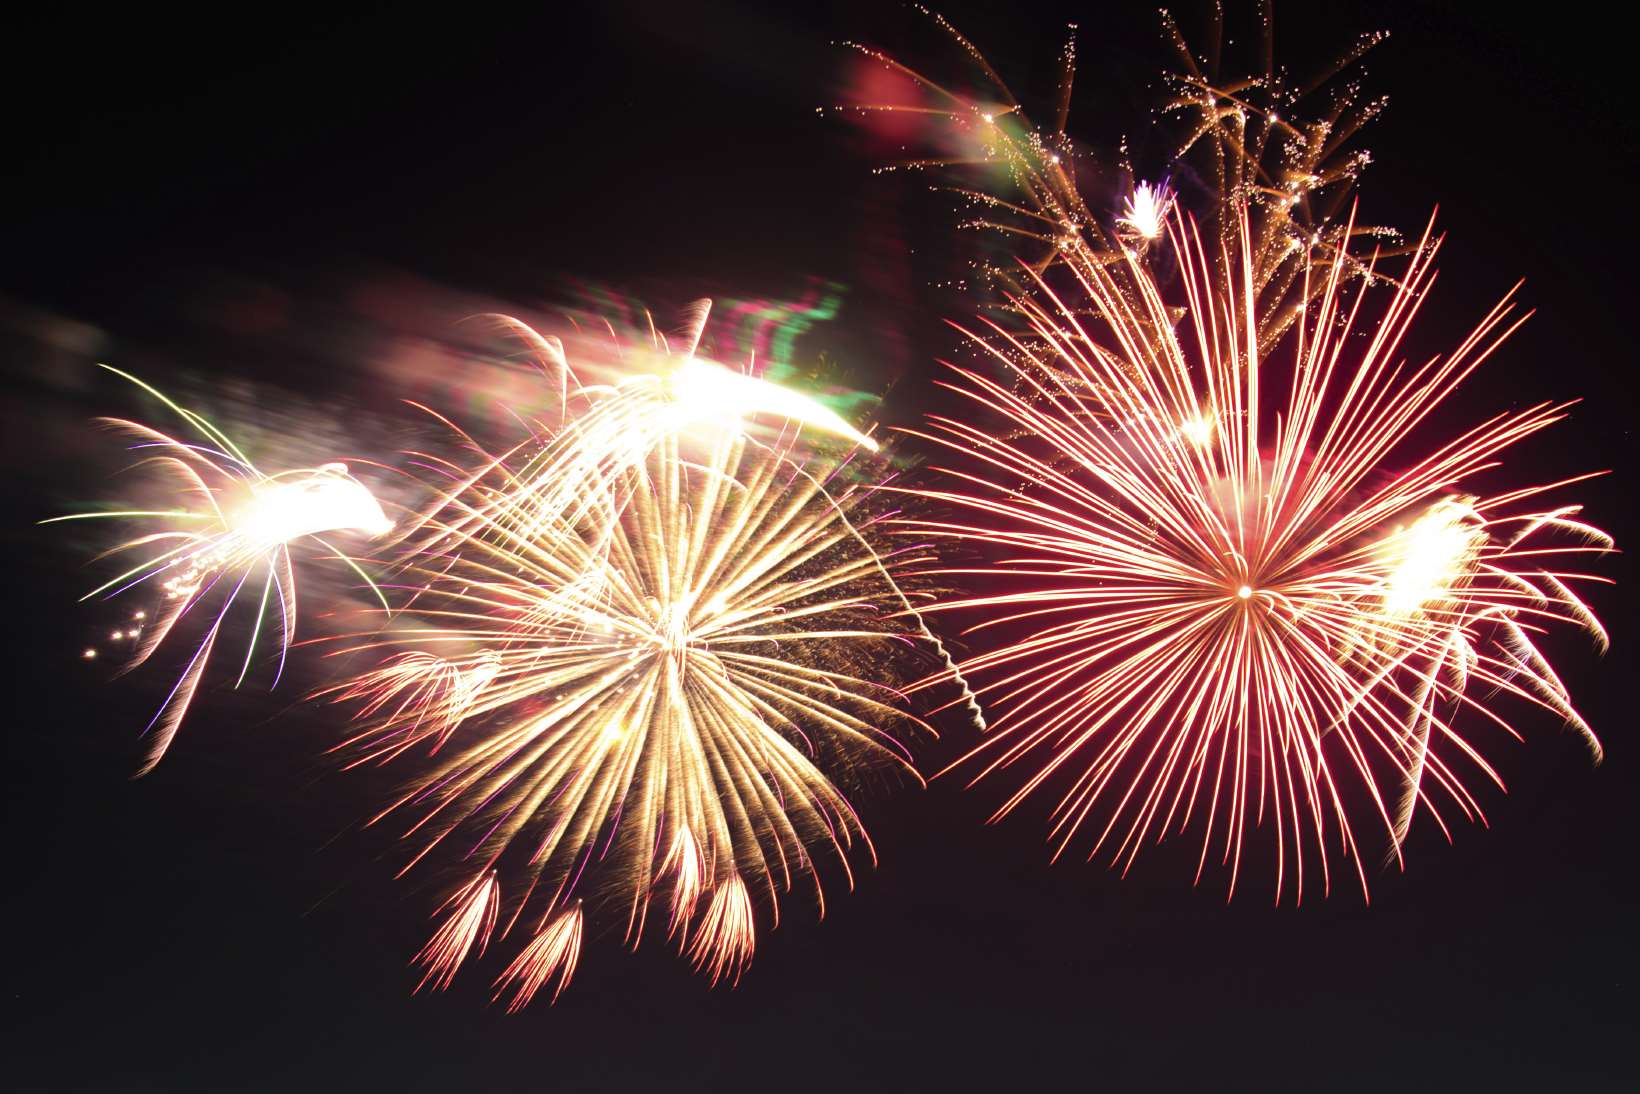 Fireworks displays are taking place across the county